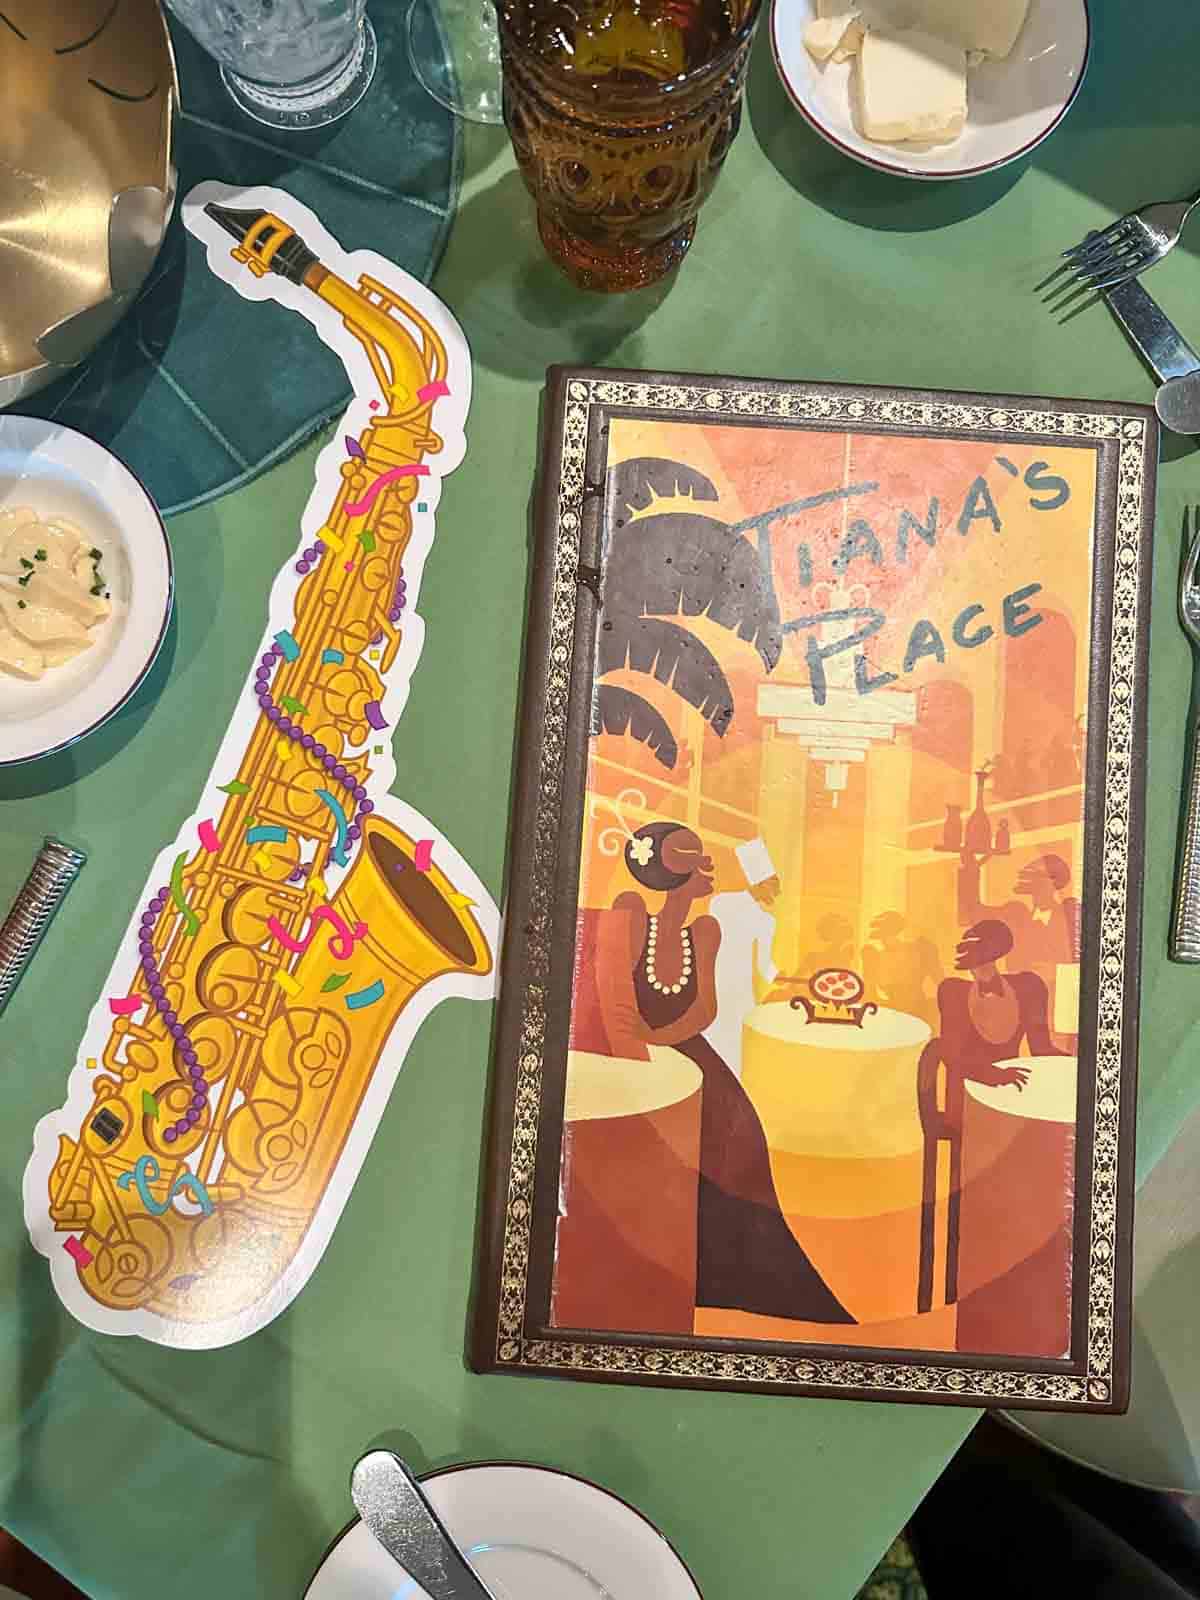 A green tablecloth with a bright yellow and orange menu next to a cut out of a saxaphone.